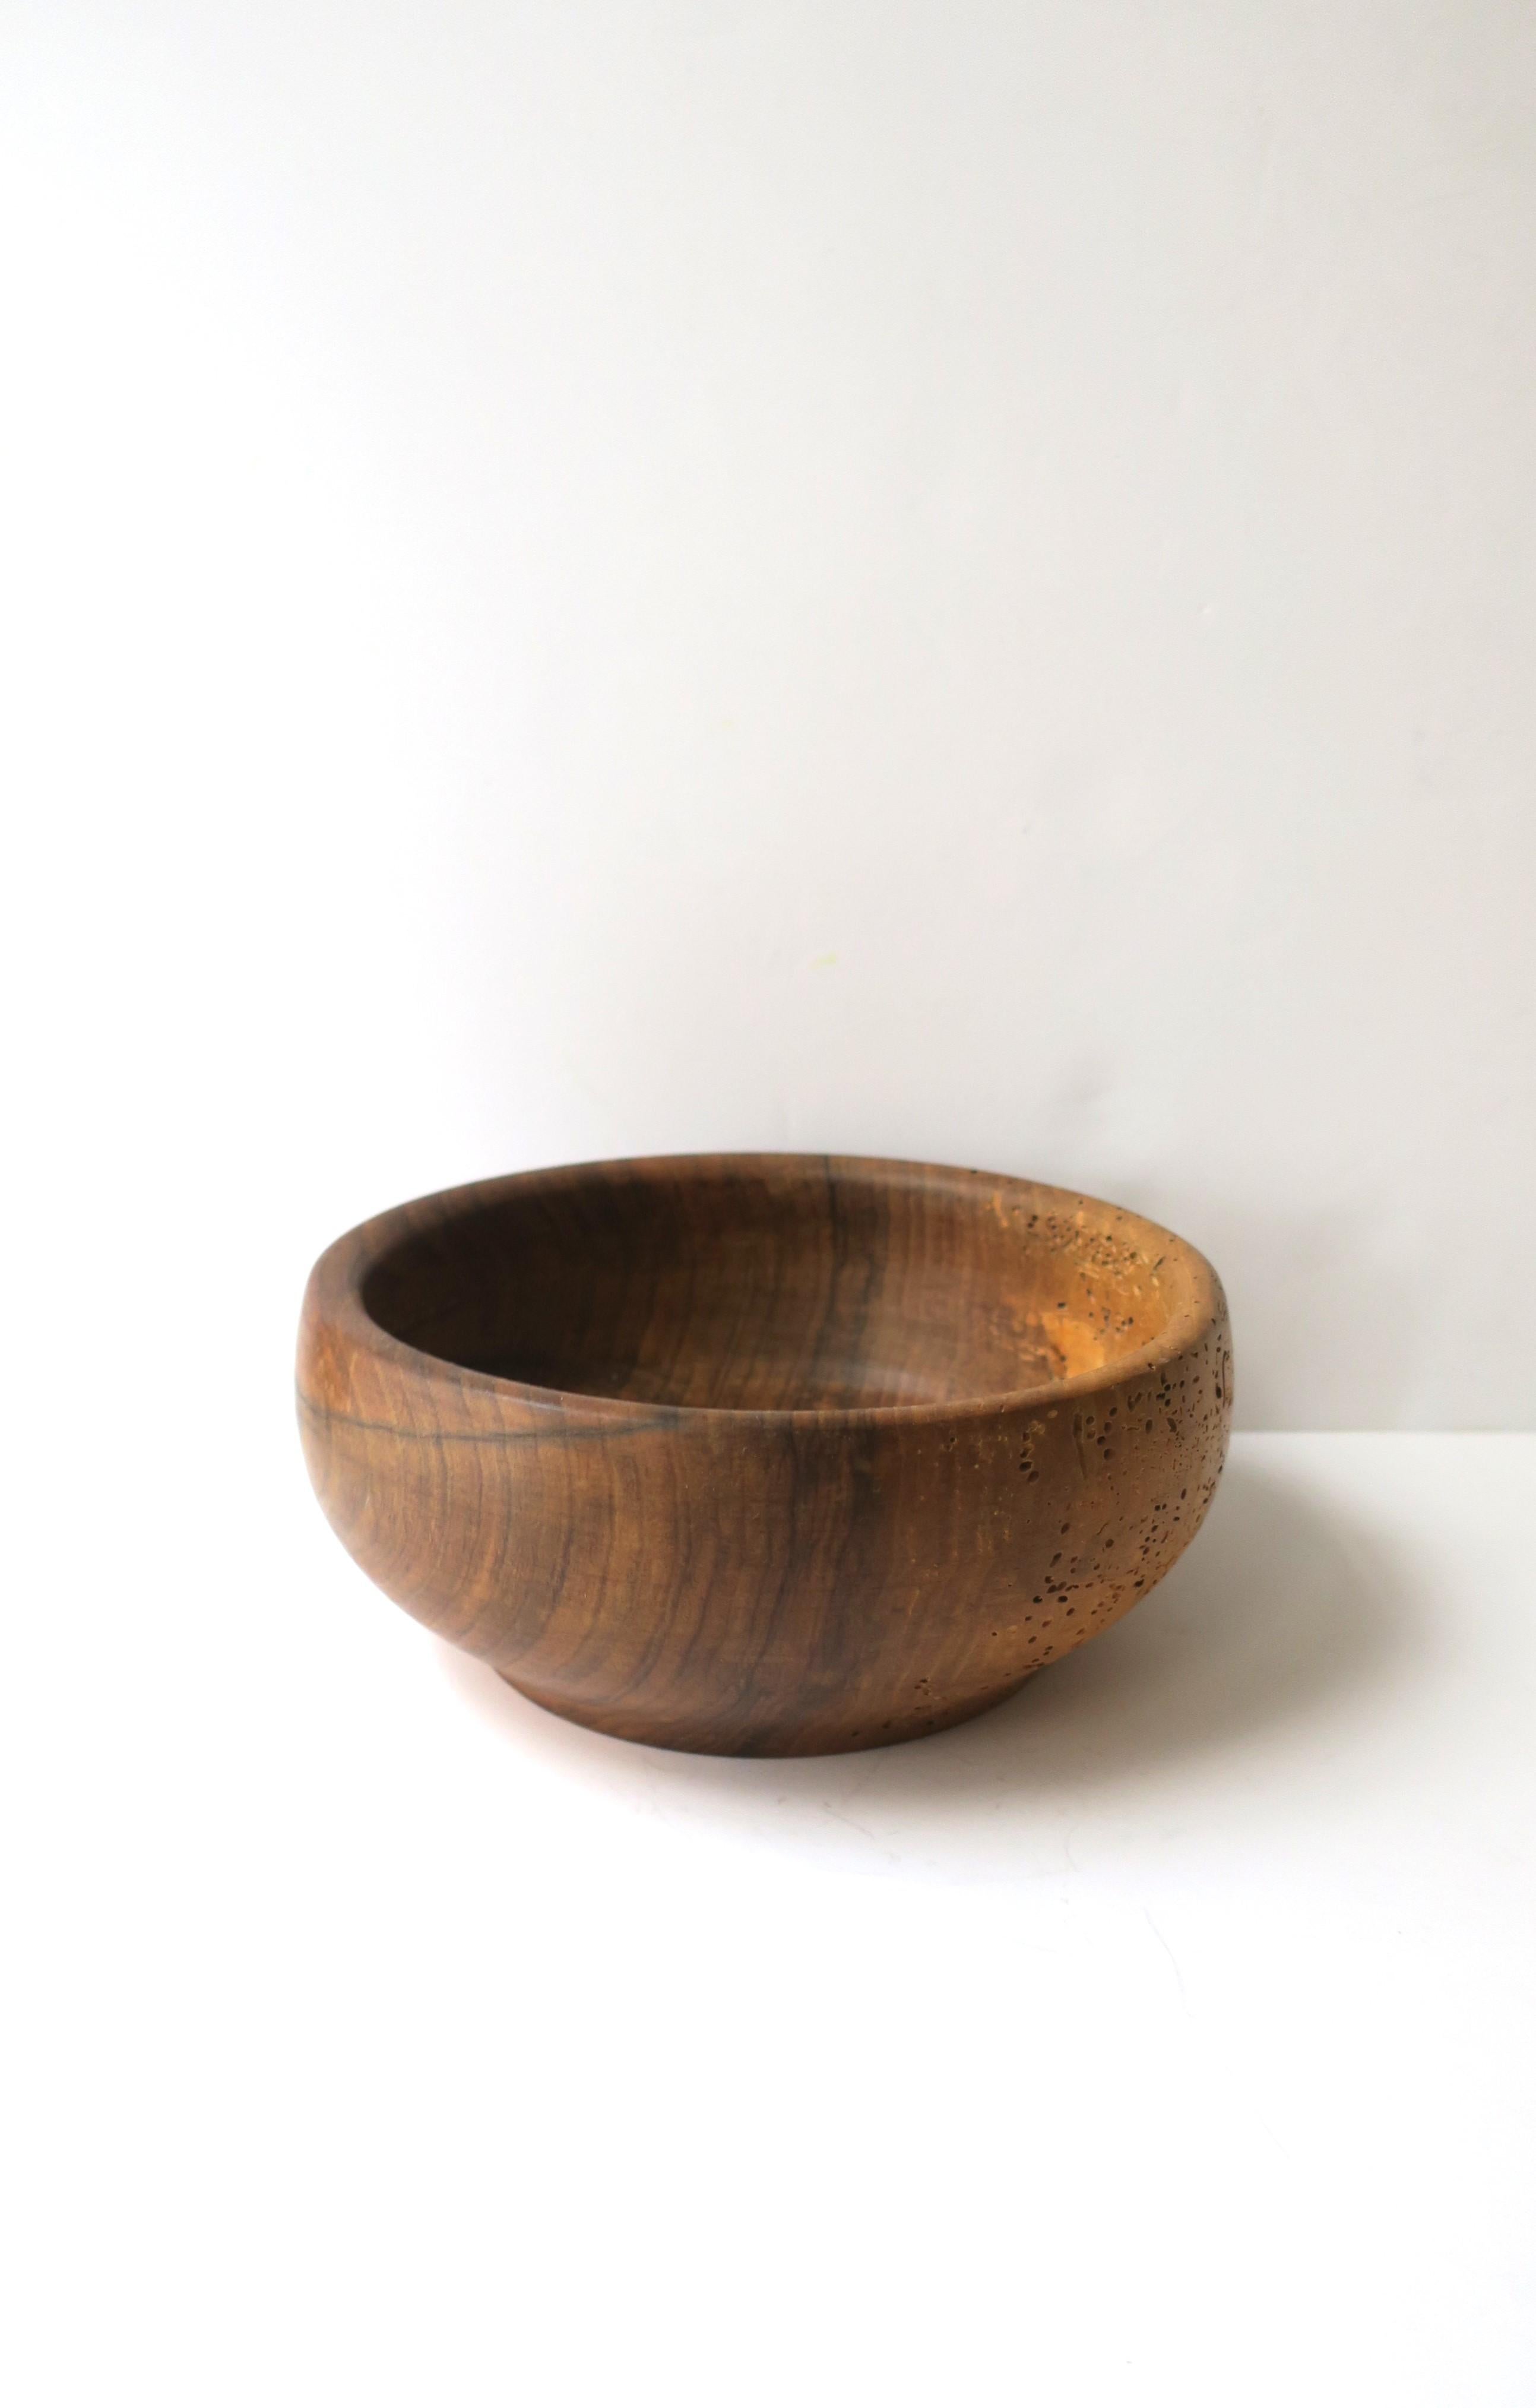 A round Austrian natural wood bowl, hand-crafted, circa mid to late-20th century, Austria. Beautiful as a standalone piece or to hold, display fruit, vegetable, etc. Markers' mark on underside as shown in last image. 

Dimensions: 3.63